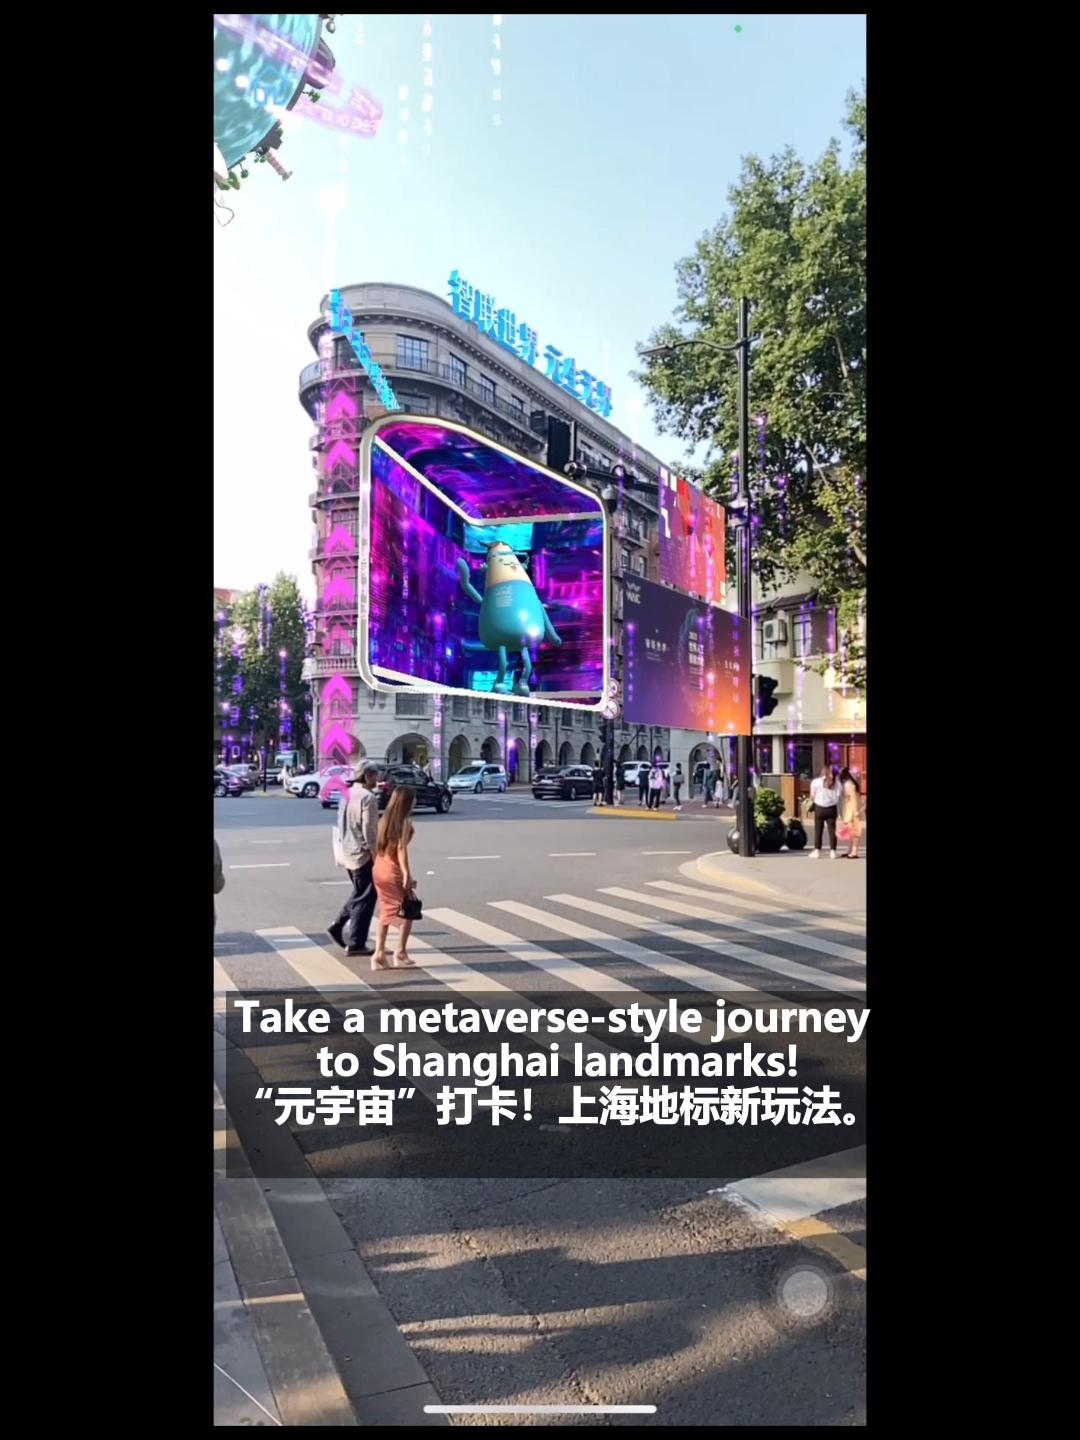 Suzhou joins other areas to serve as metaverse hub in China